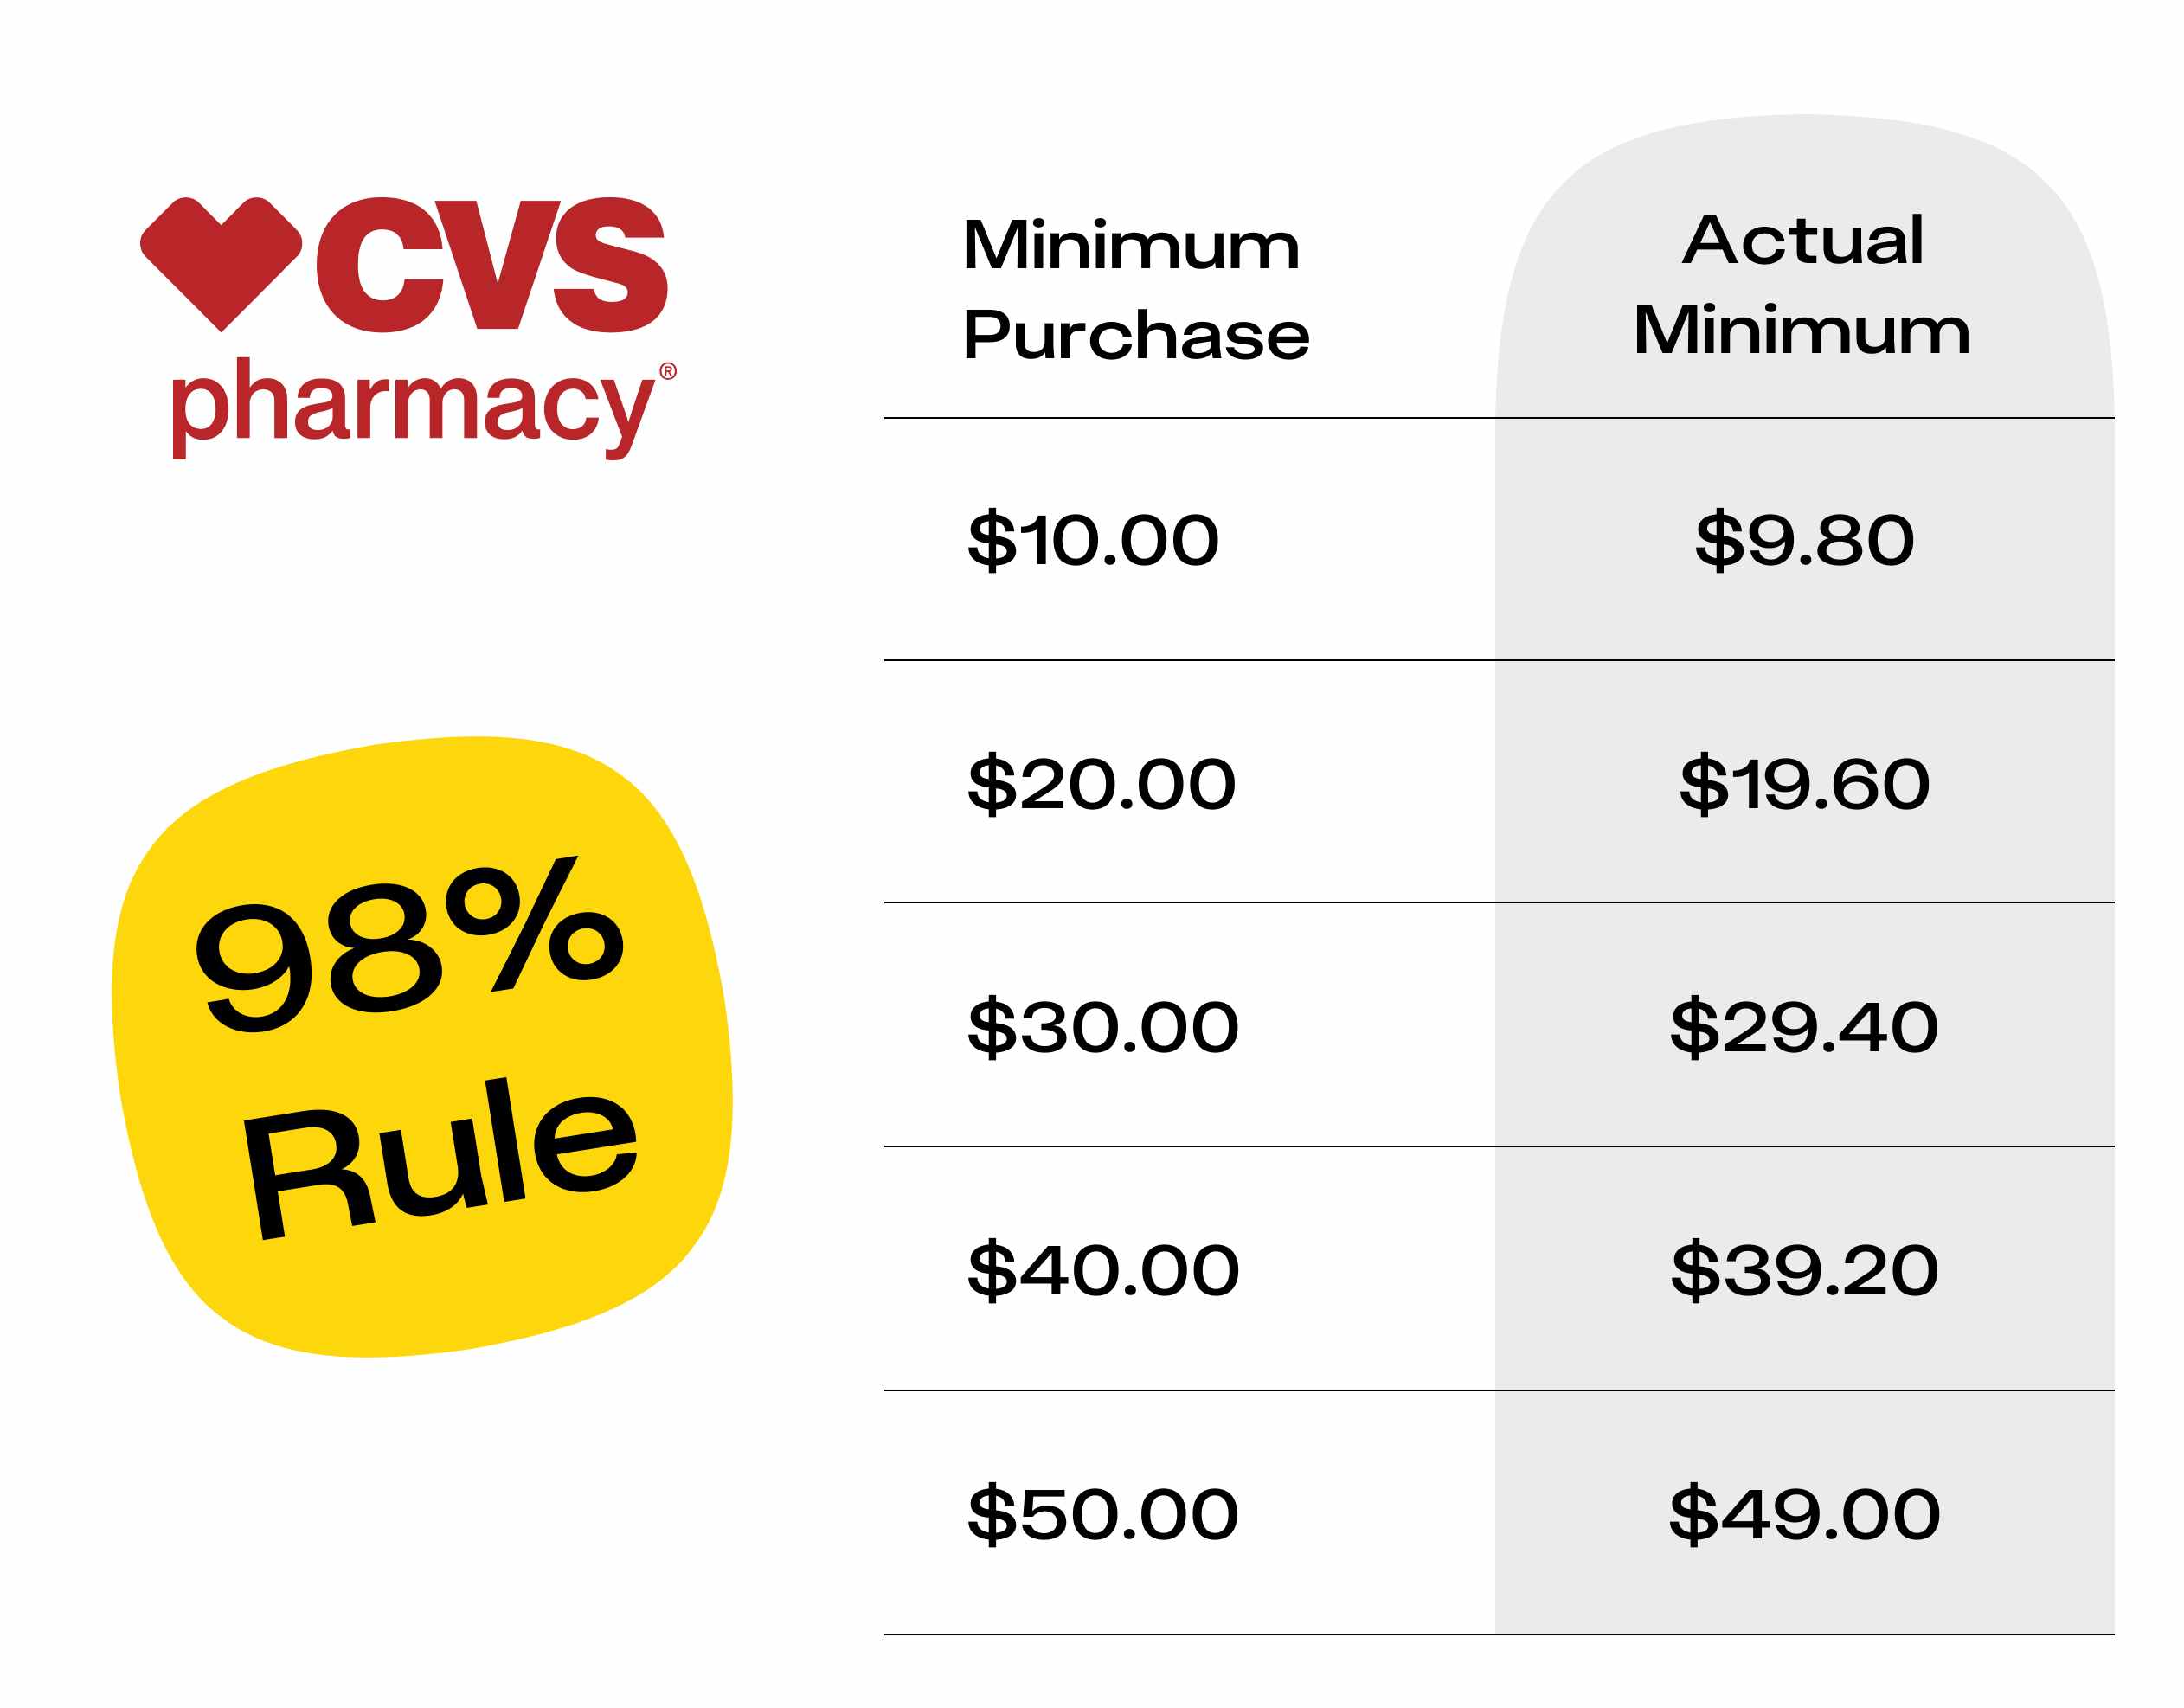 A chart explaining the CVS 98 percent rule, which says you only need to spend $9.80 to meet a $10 minimum purchase threshold.